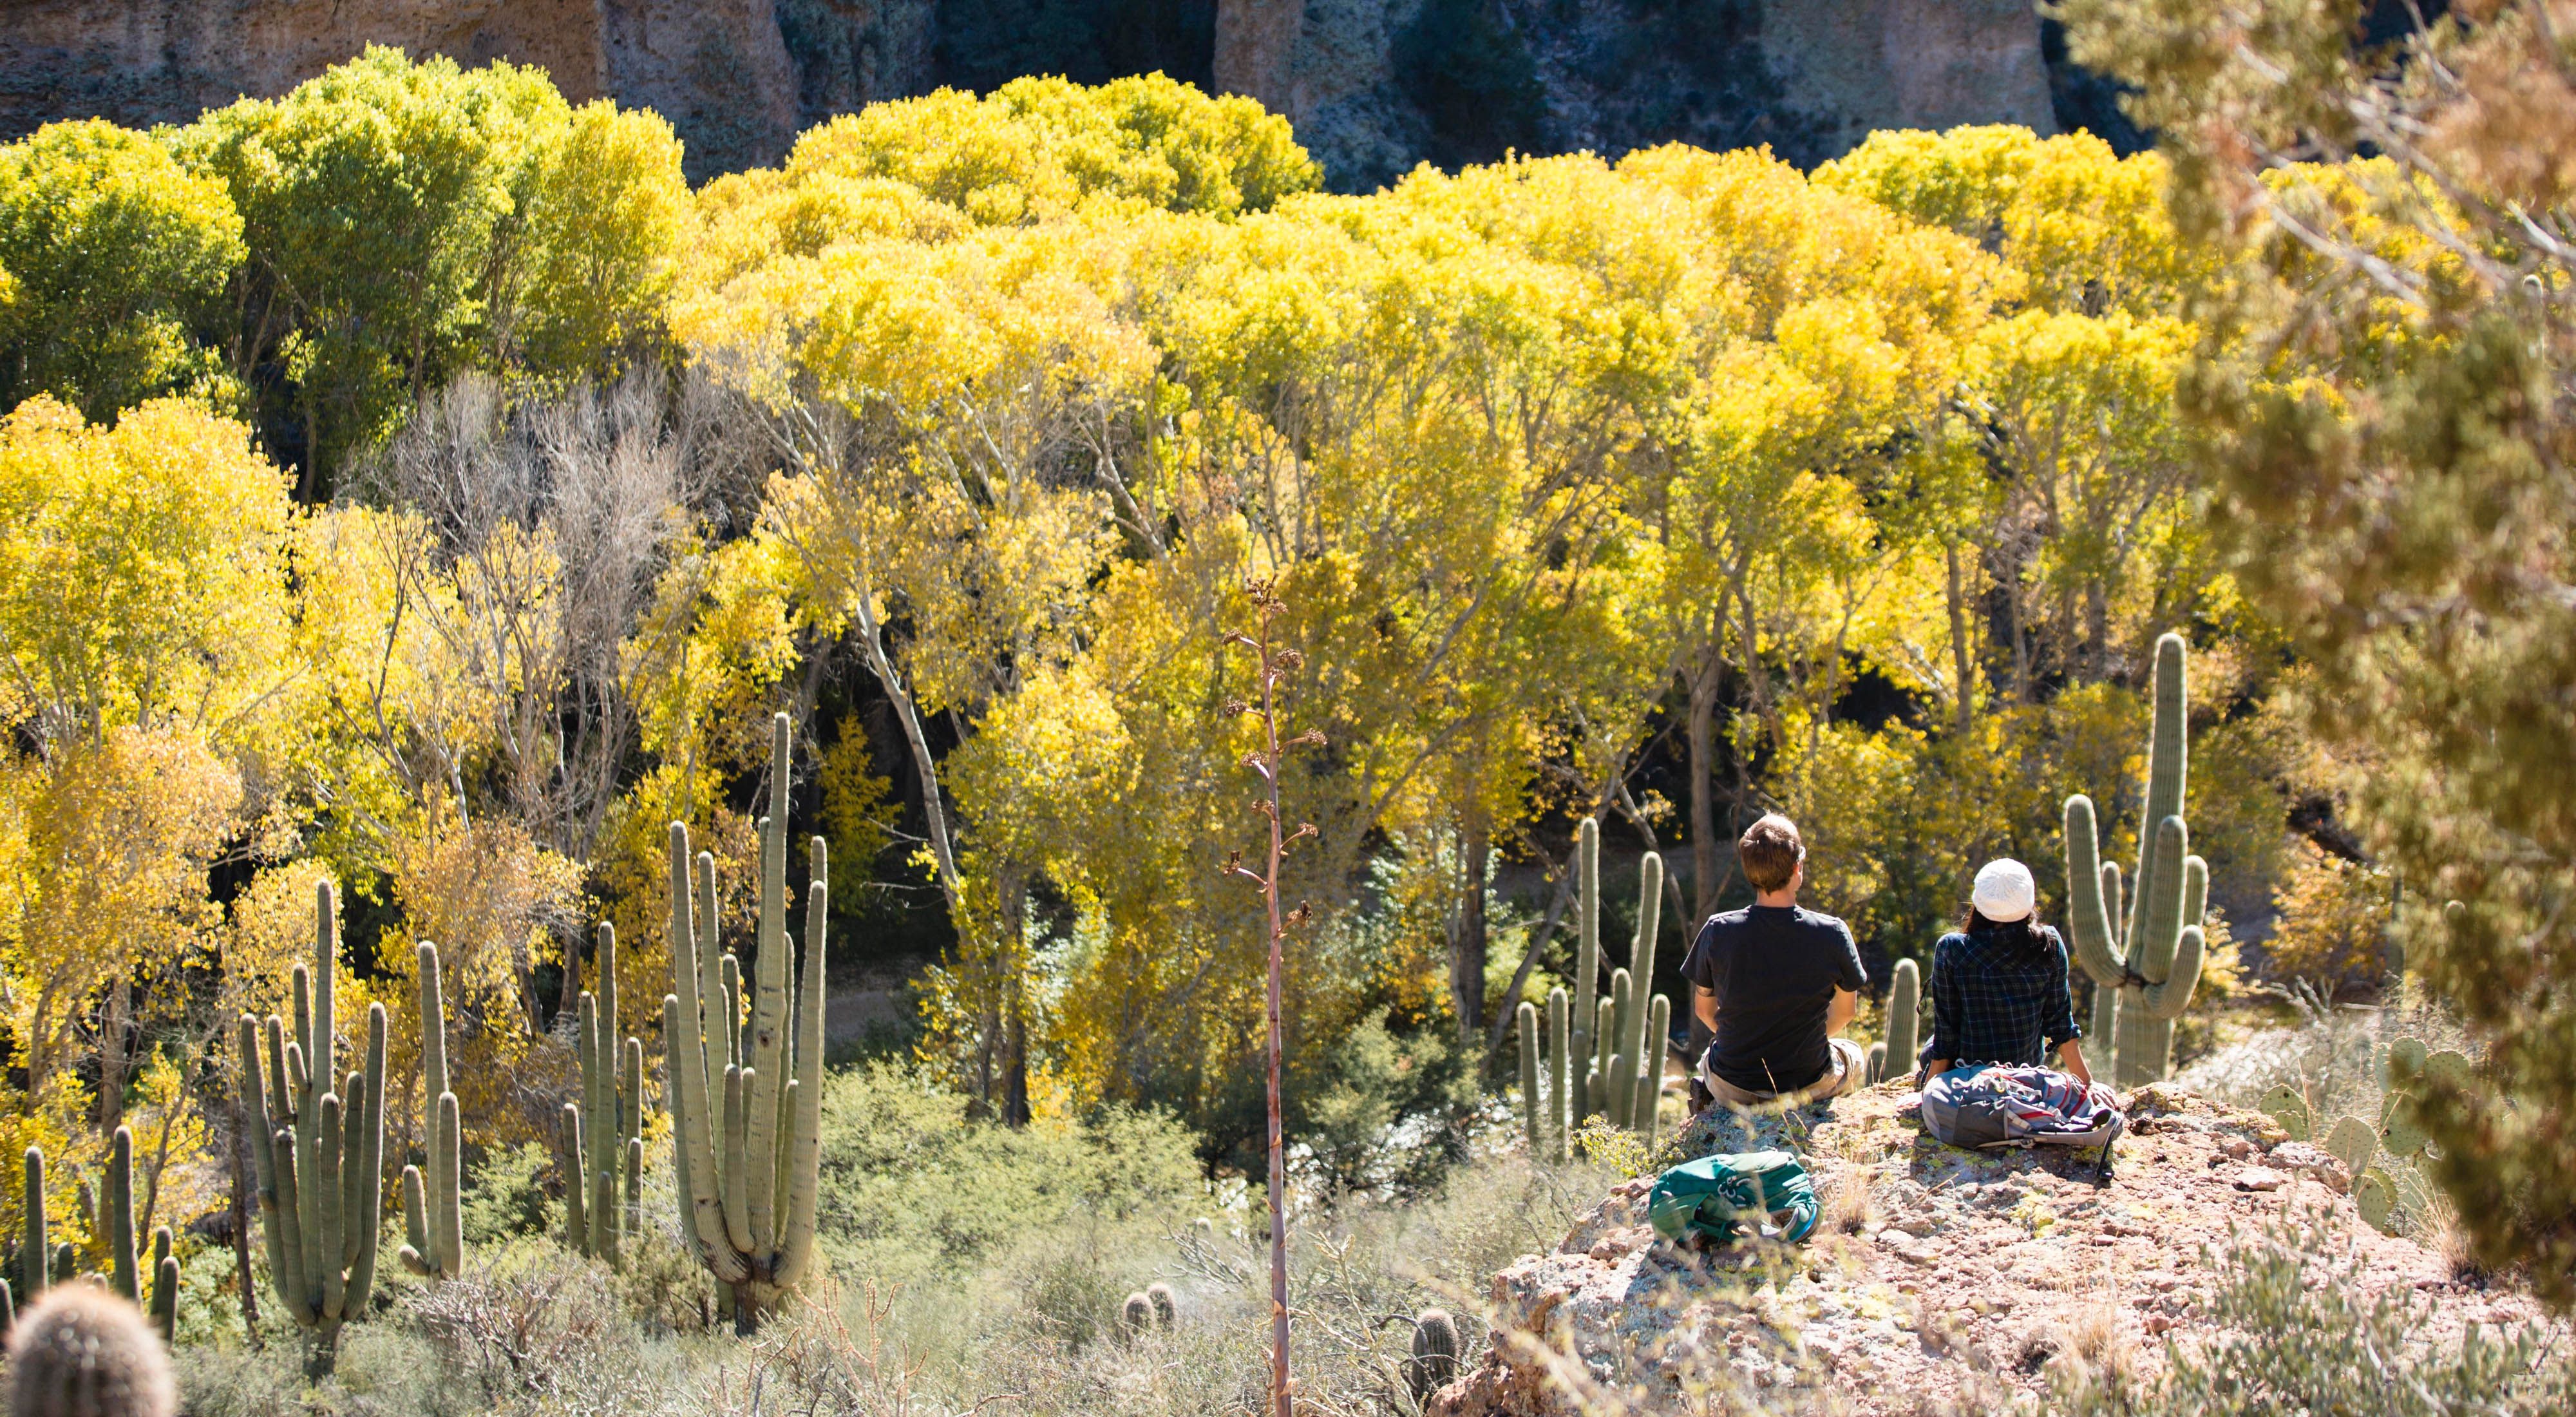 Hikers viewed from behind sitting on a slope surrounded by cactuses, trees and shrubs.